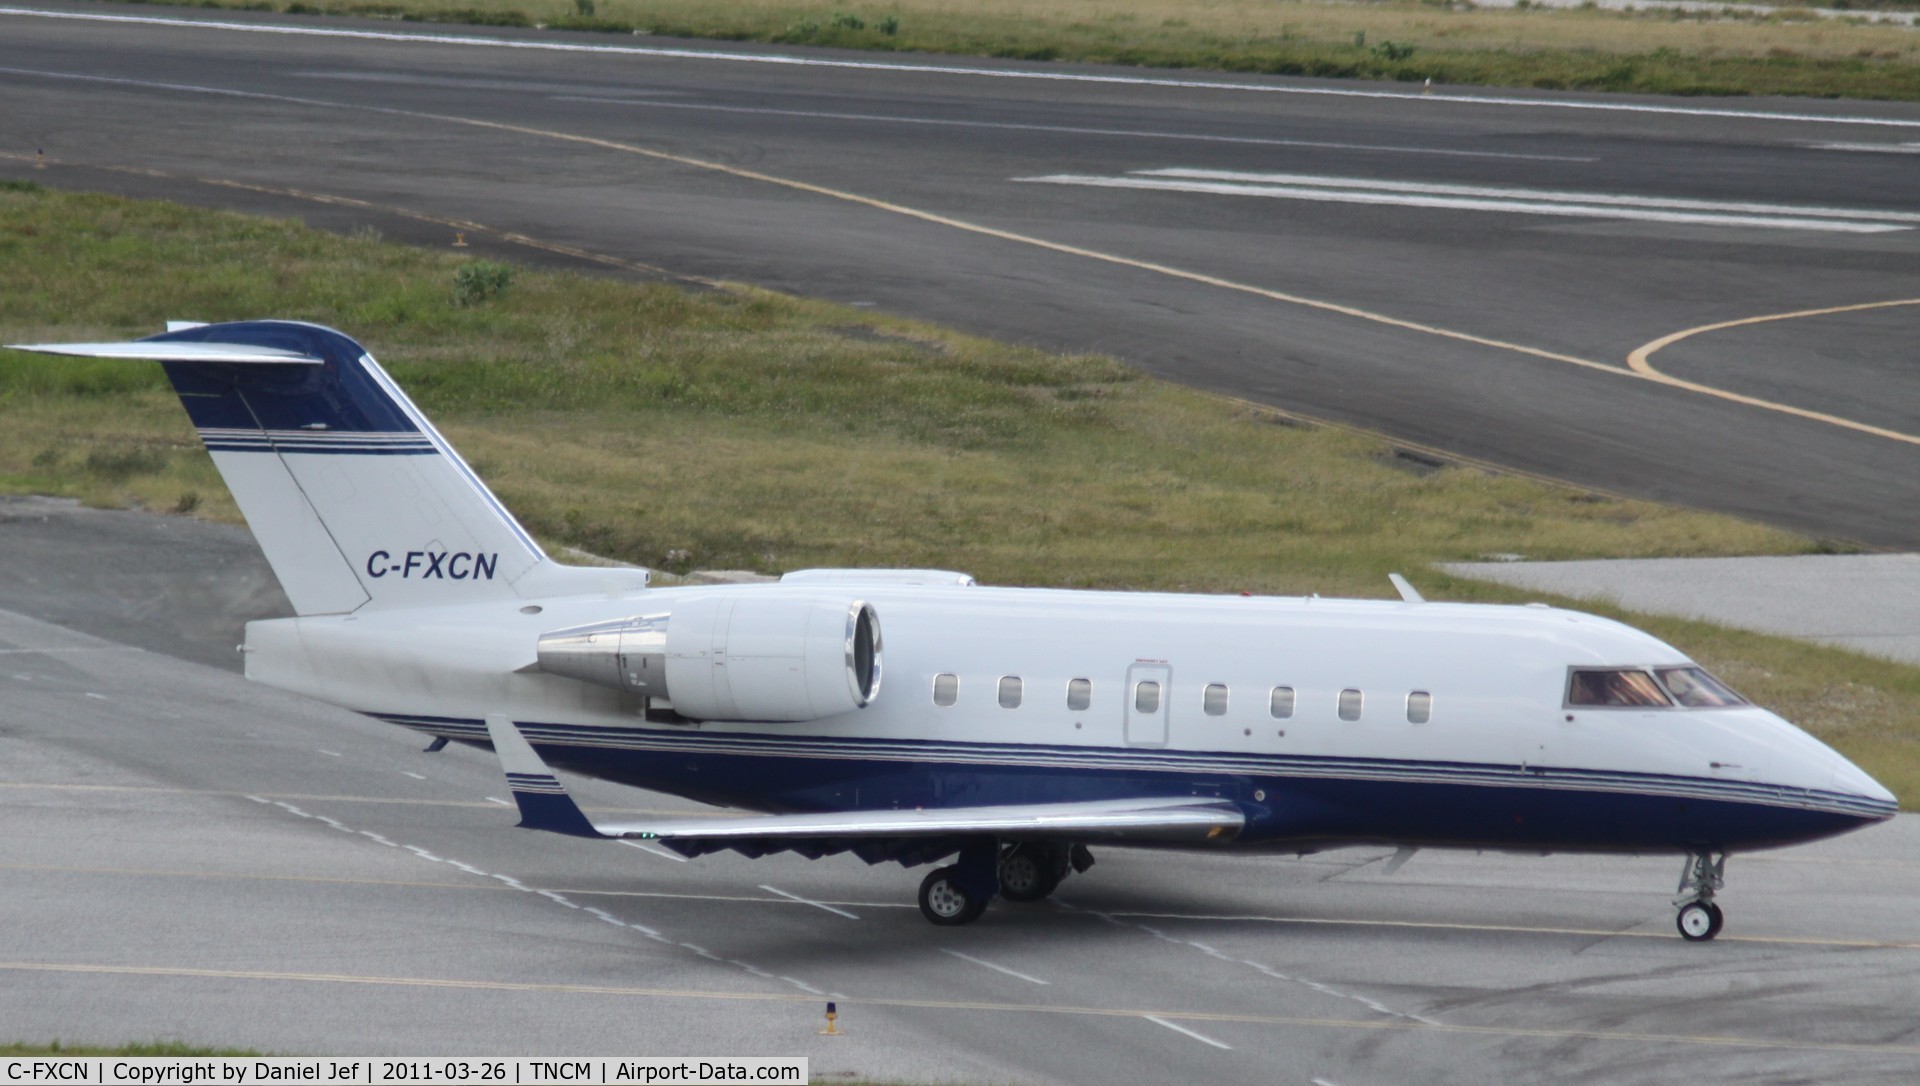 C-FXCN, 2000 Bombardier Challenger 604 (CL-600-2B16) C/N 5474, C-FXCN taxing for take off at TNCM